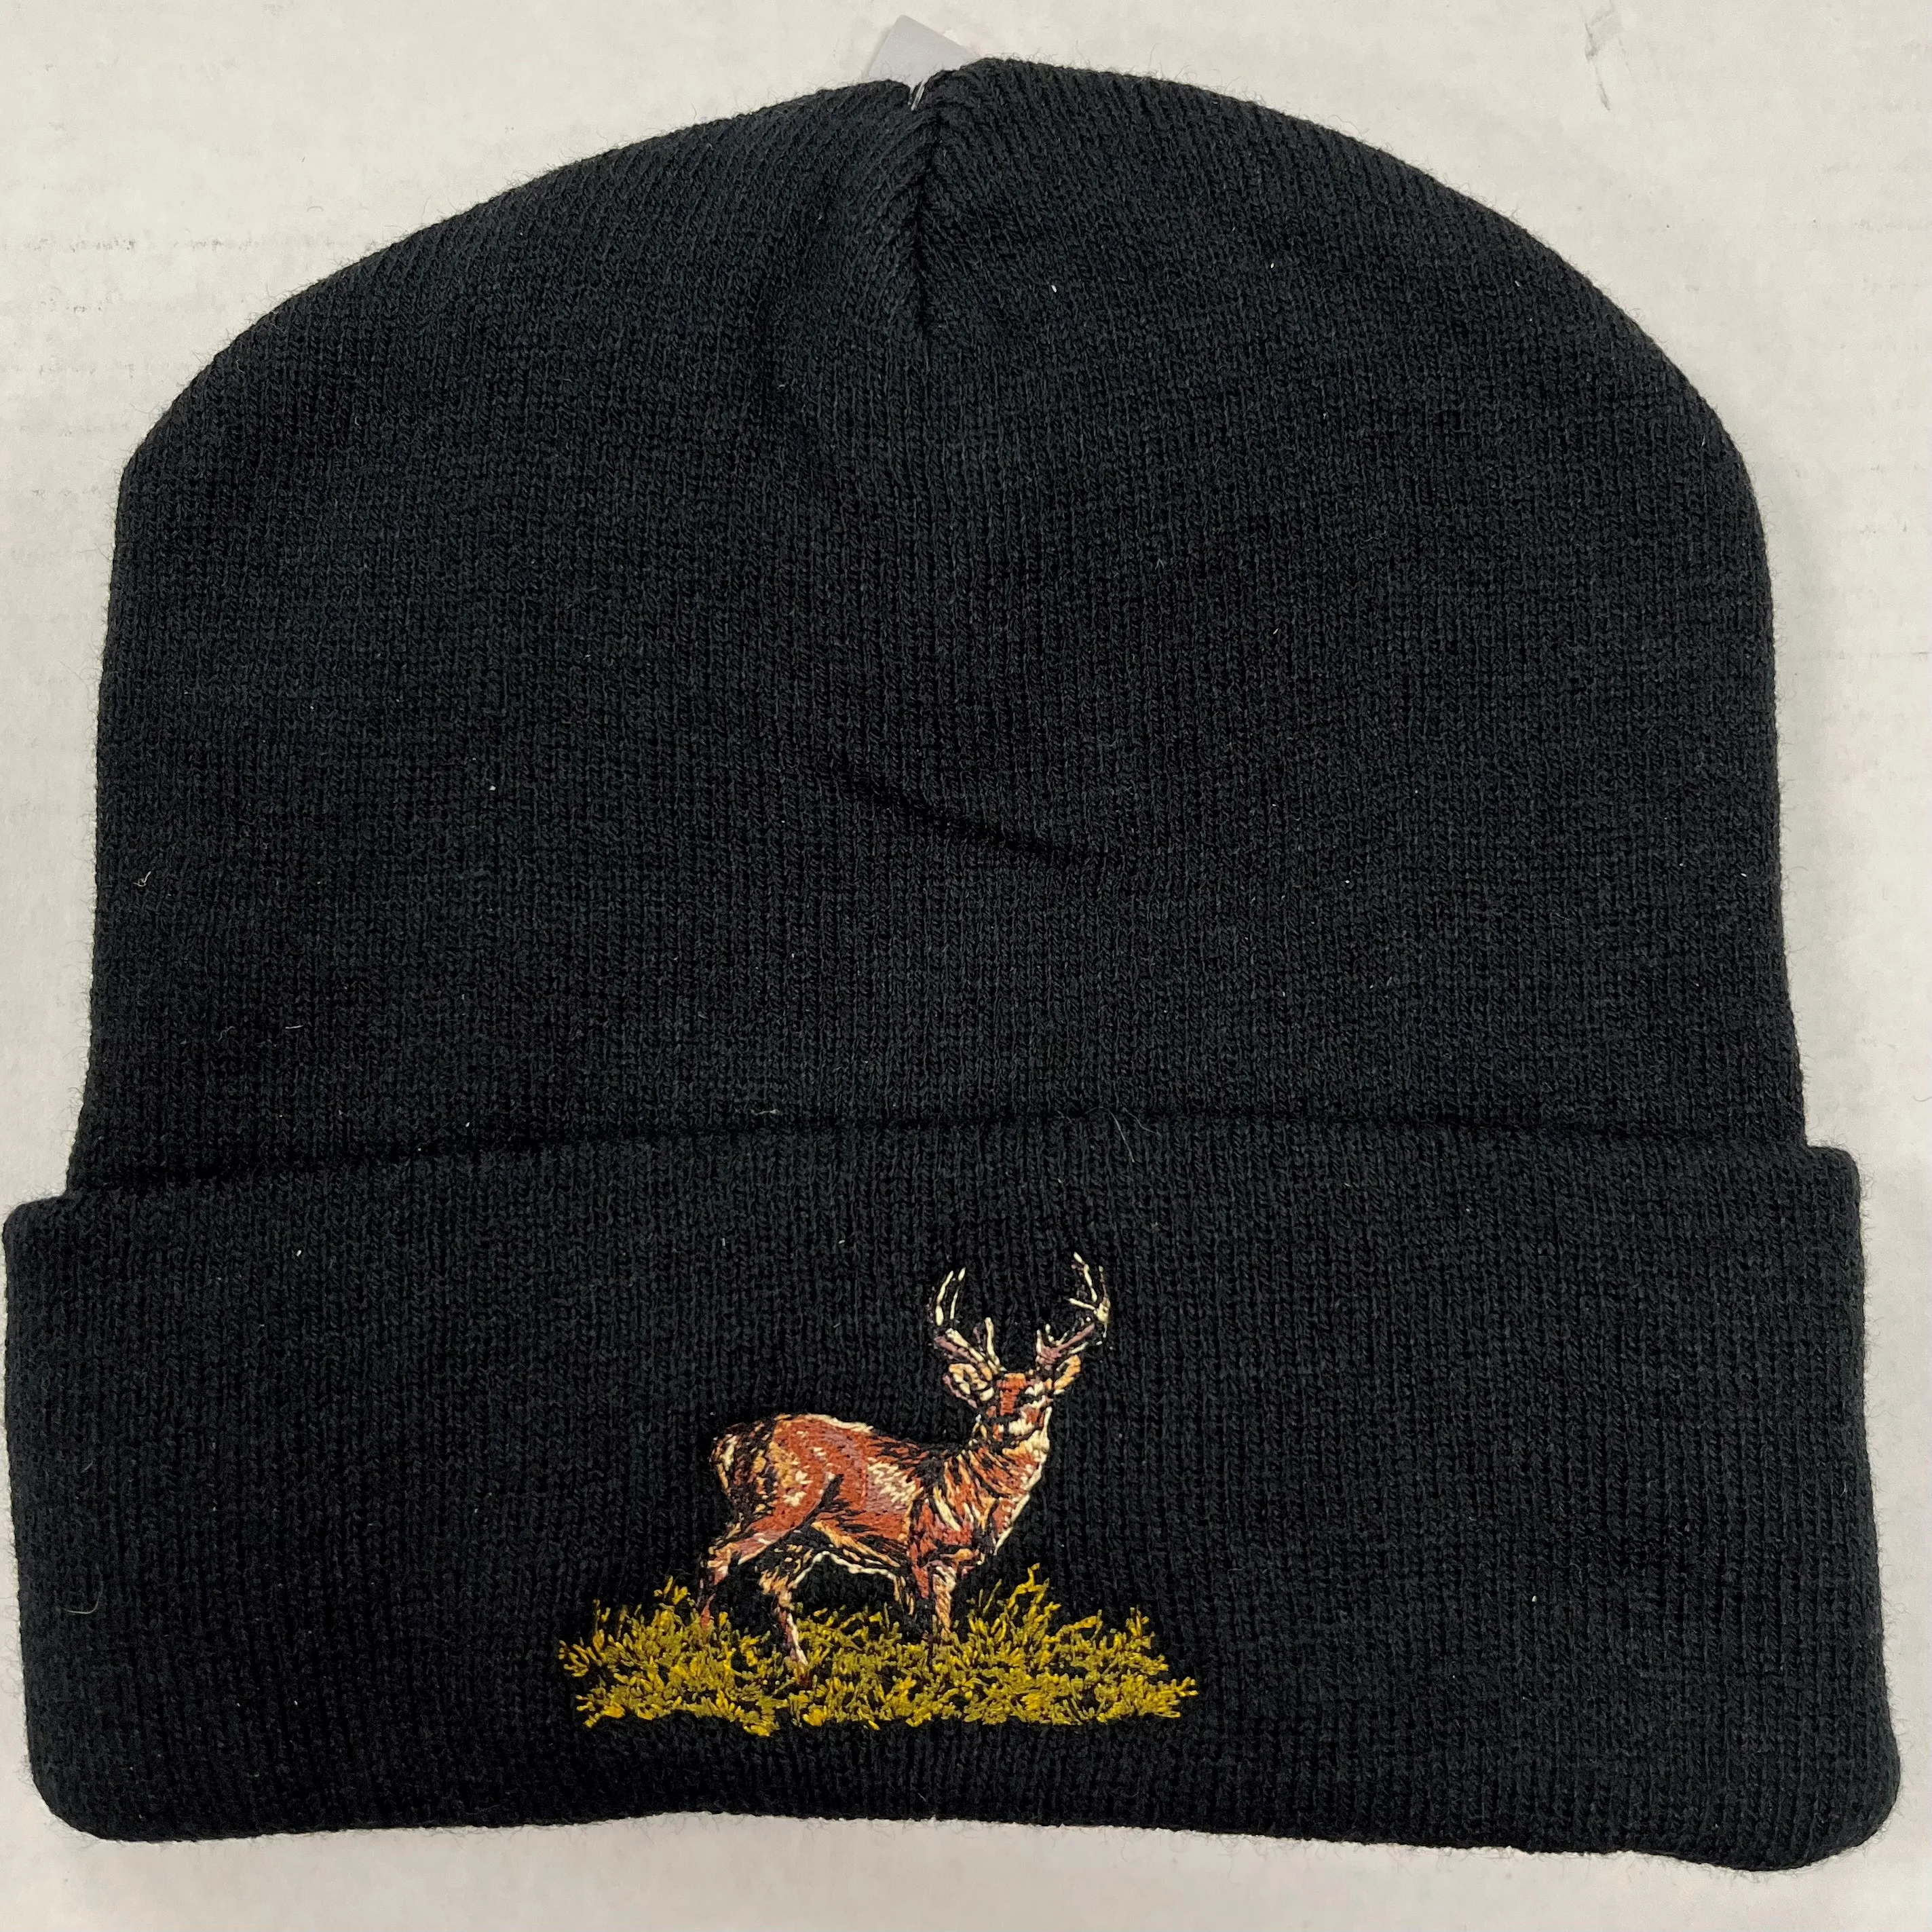 Thinsulate Embroidered Hats